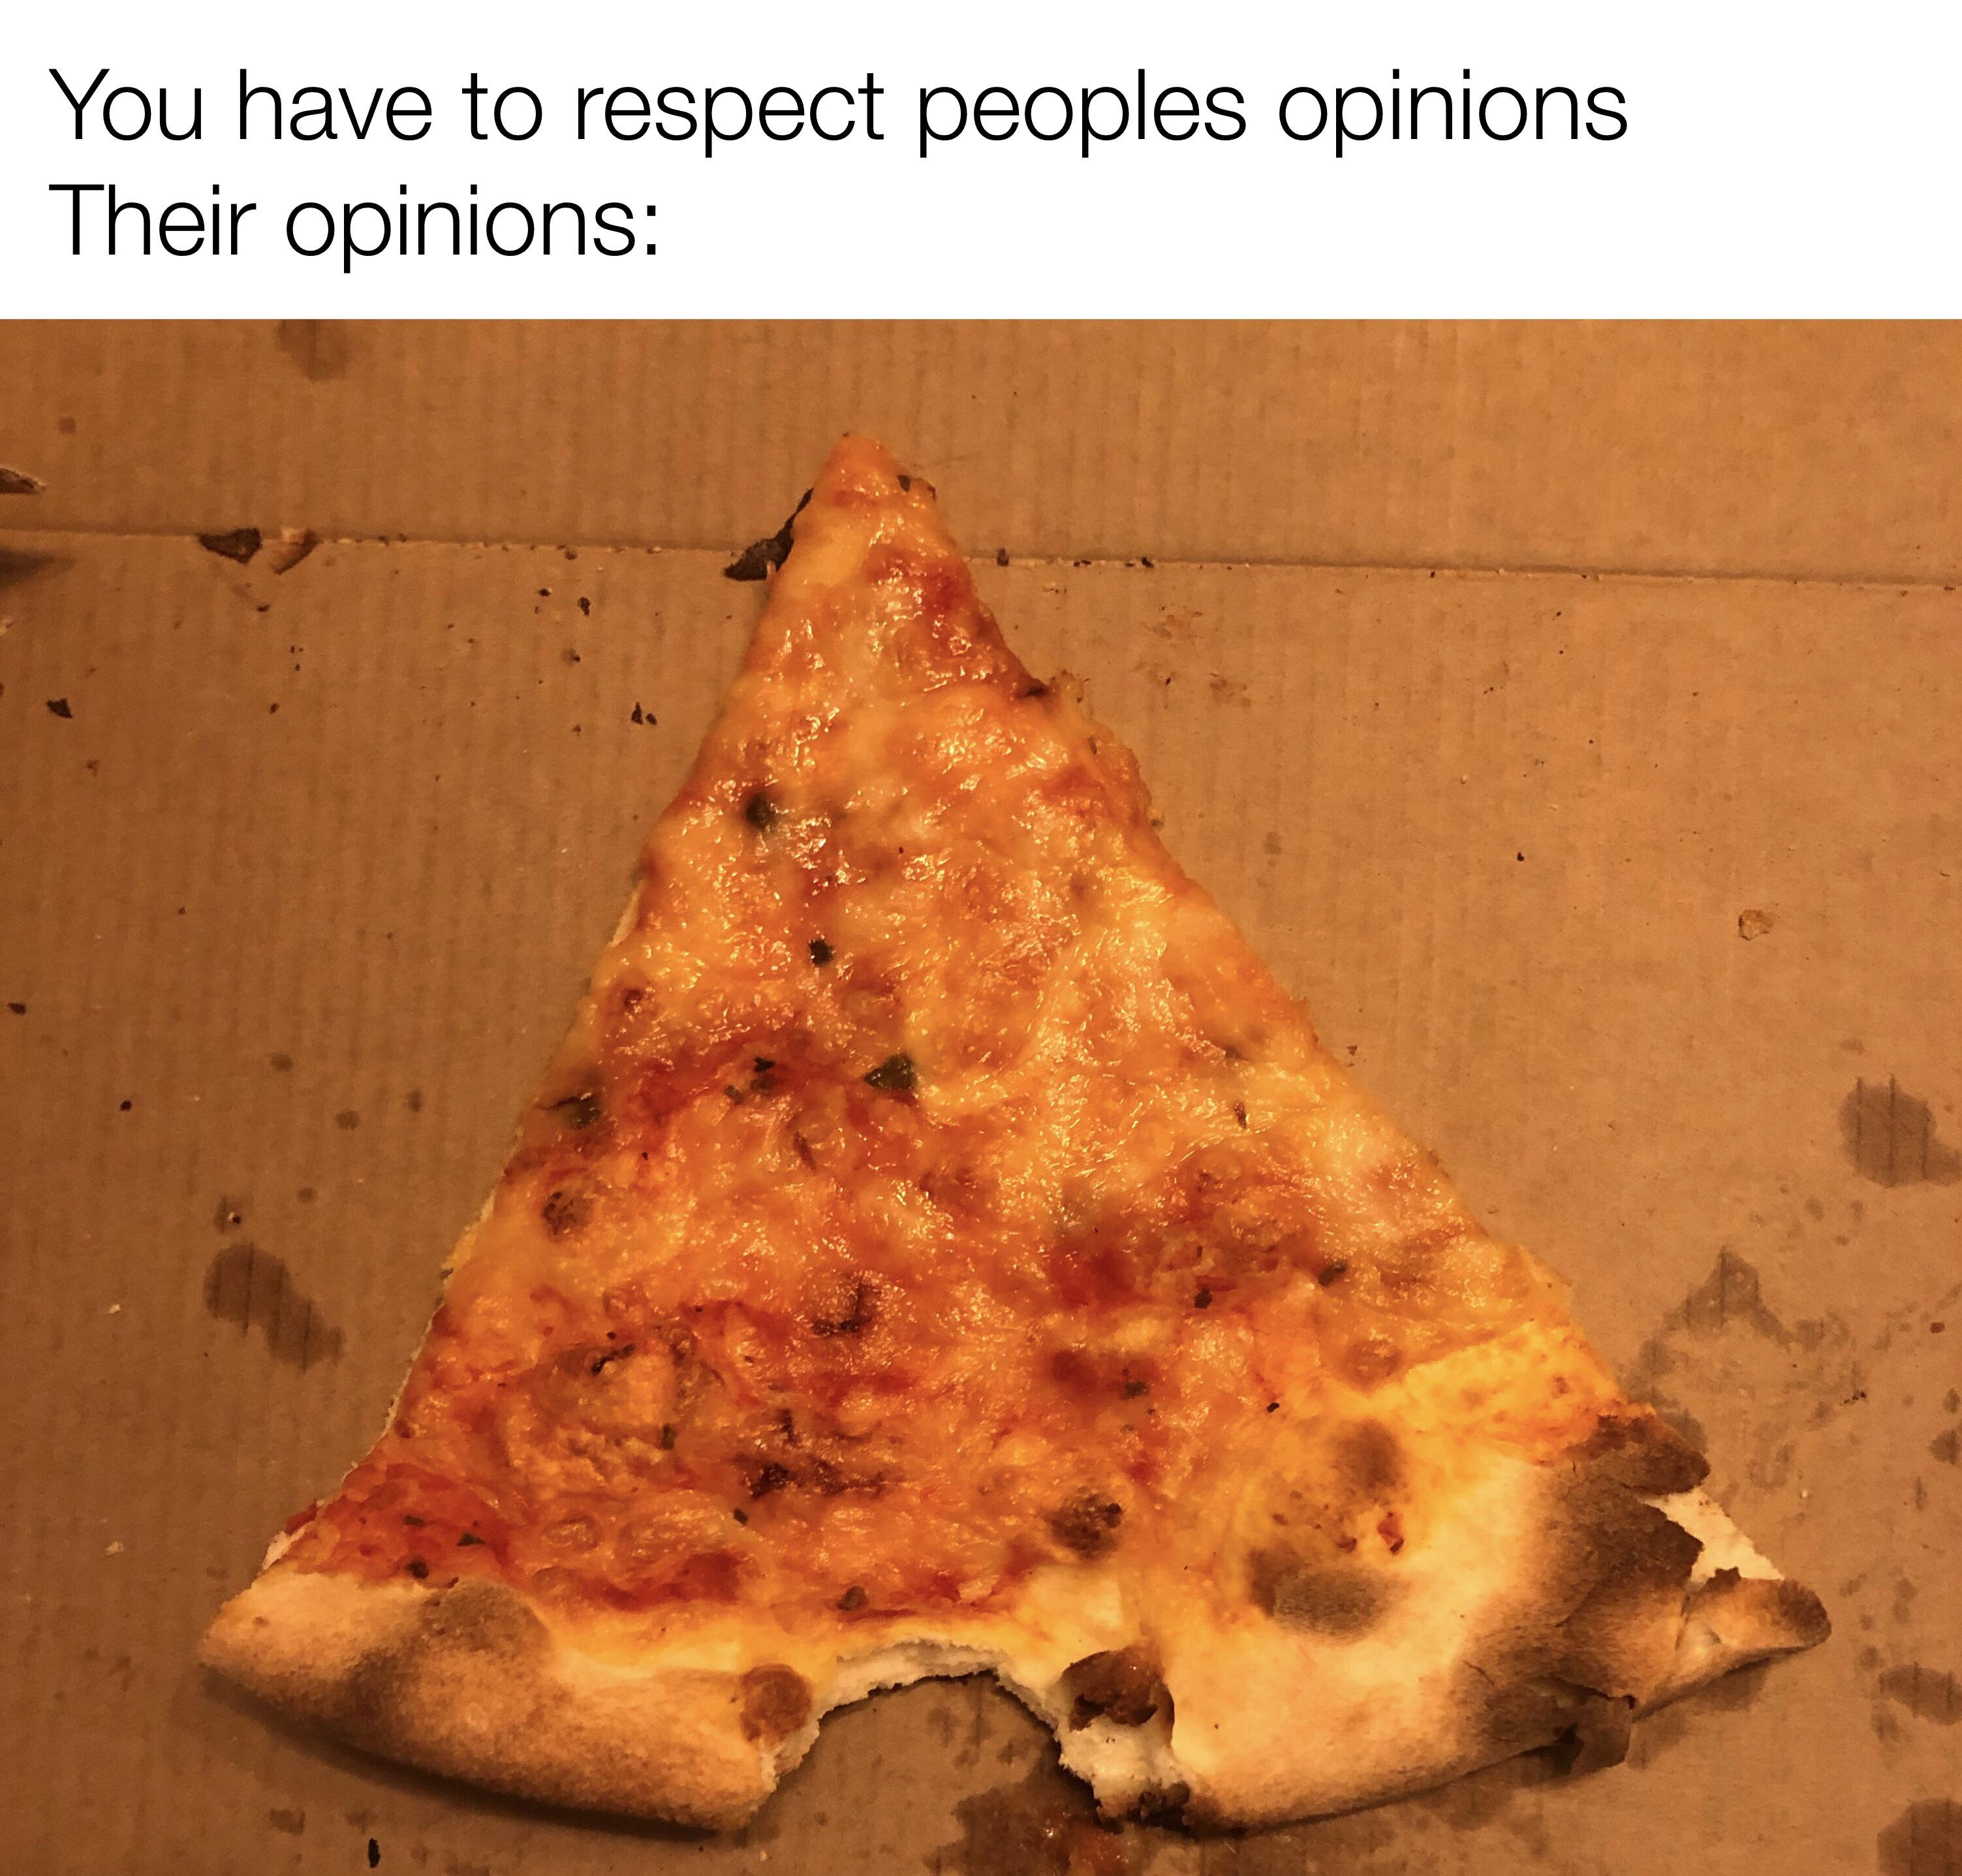 monday morning randomness - pizza - You have to respect peoples opinions Their opinions